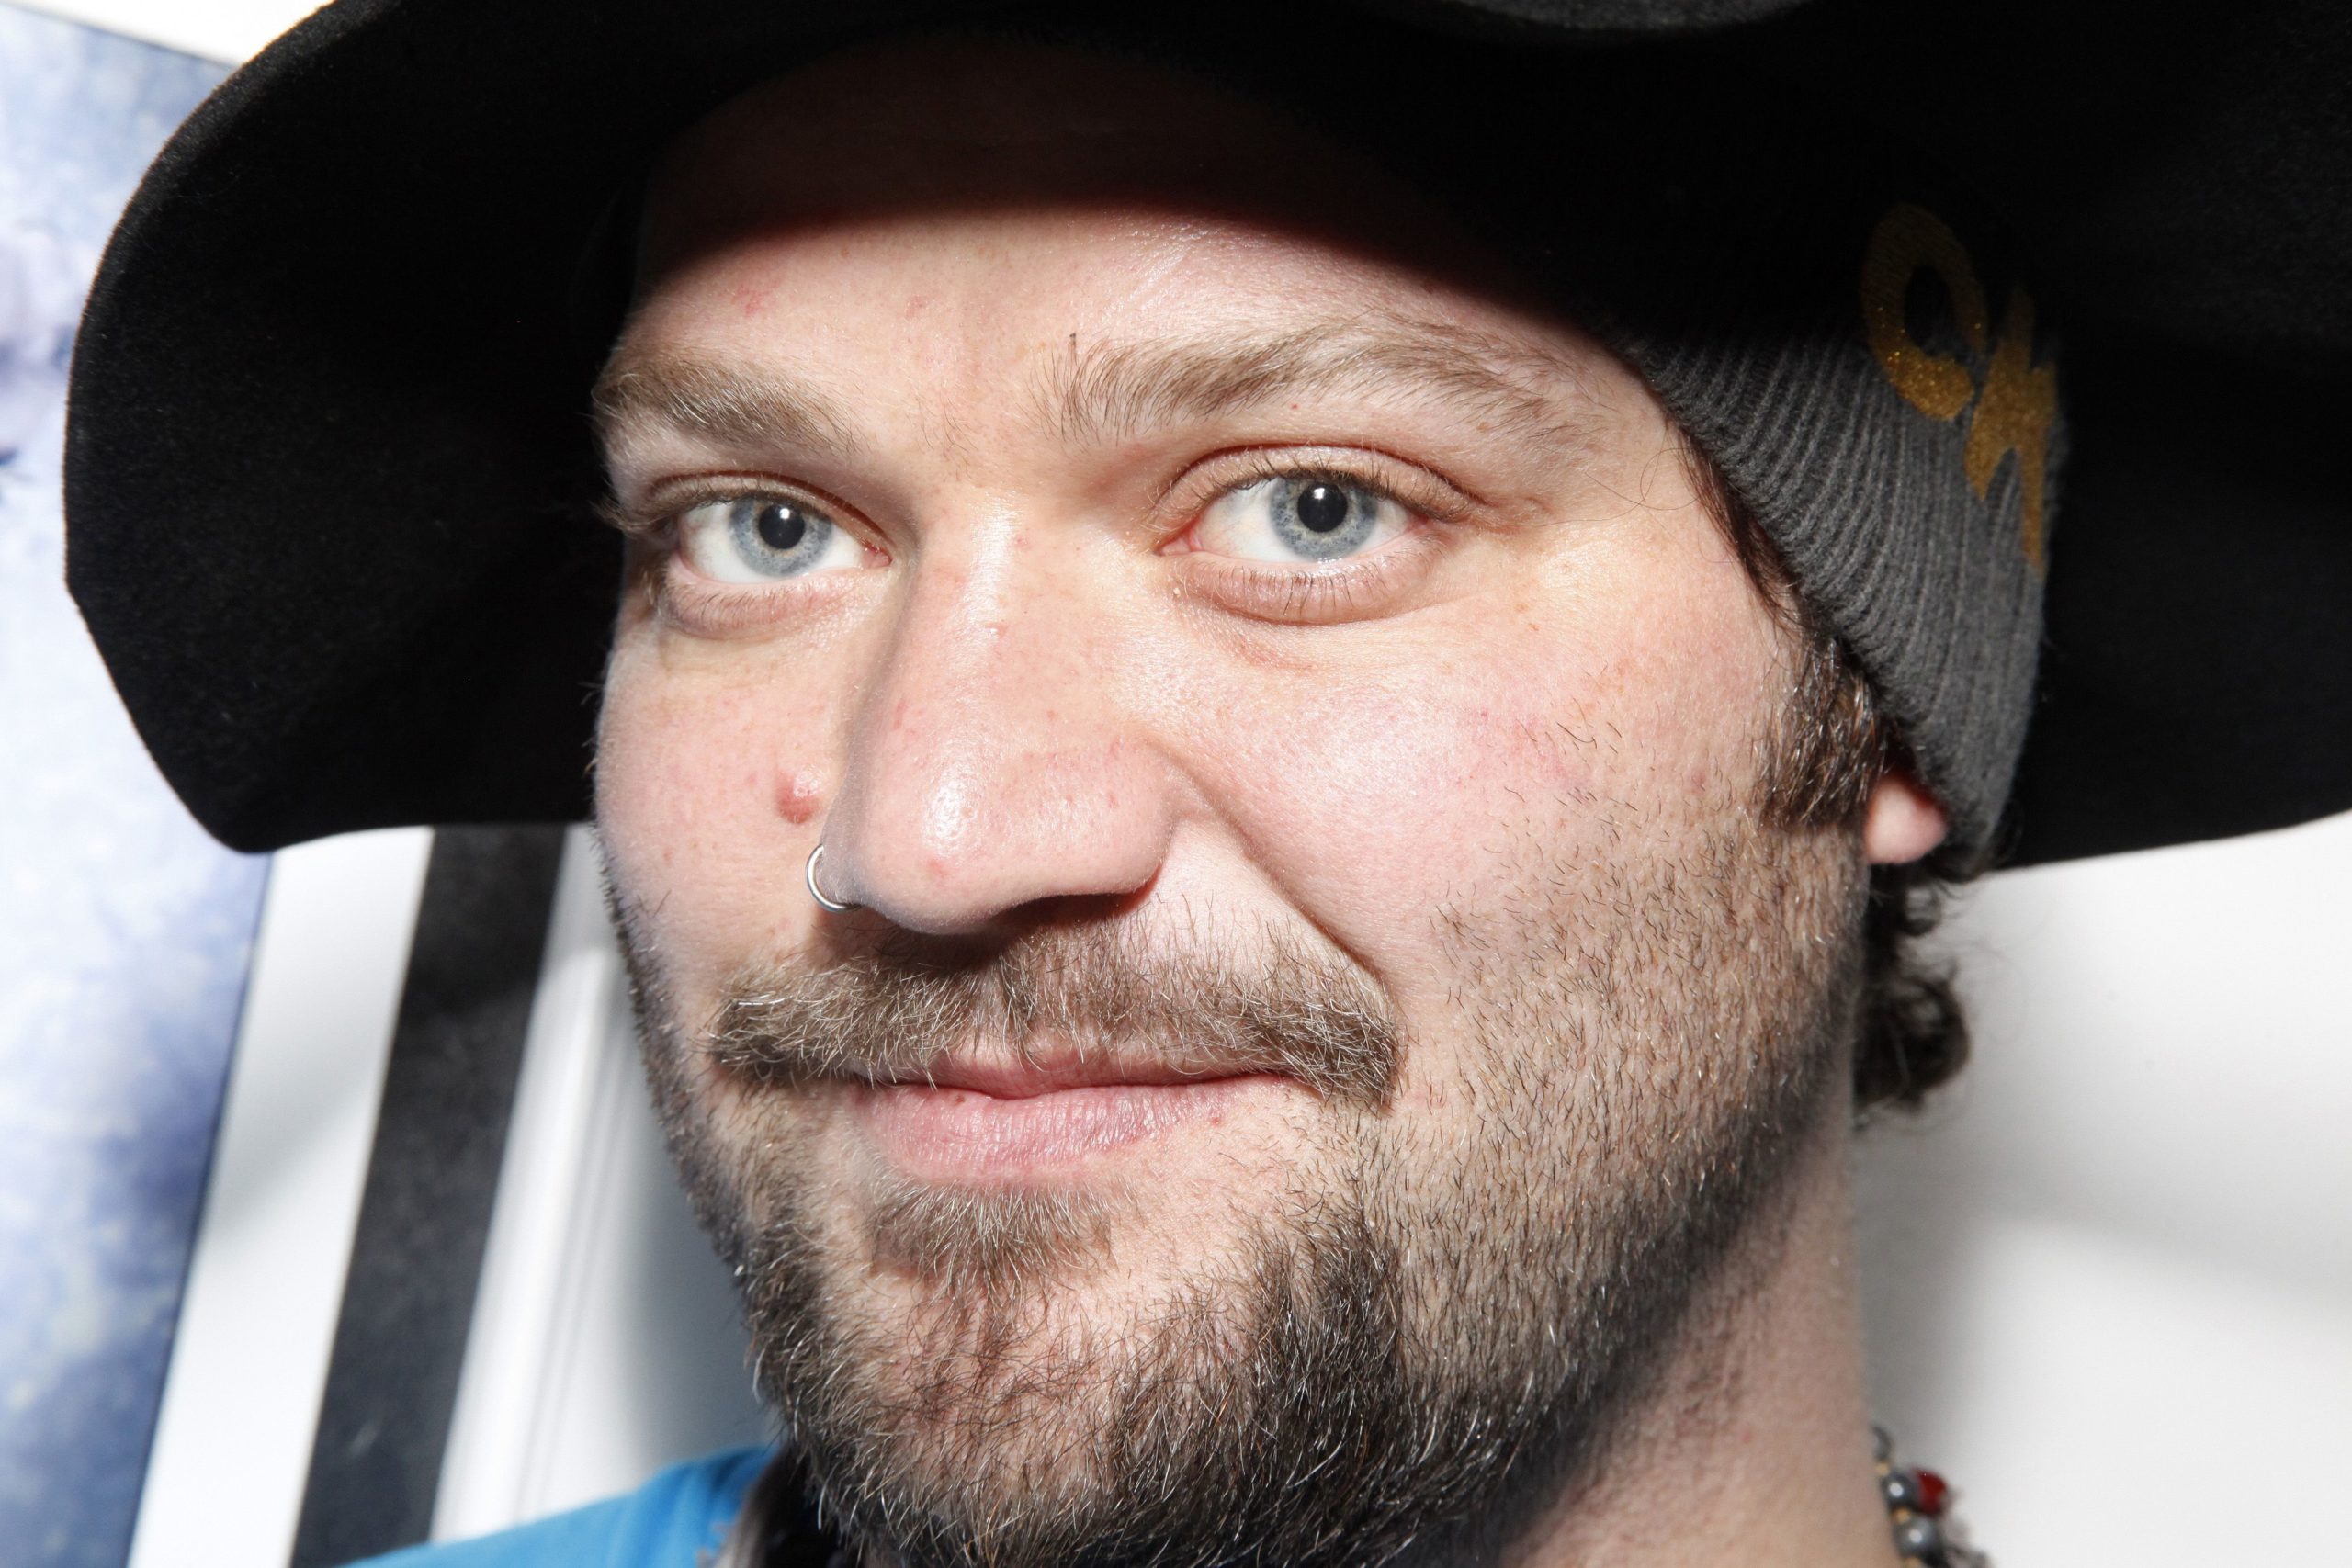 ’Bam Margera and Friends’ Art Exhibition at The James Oliver Gallery in Philadelphia, America – 07 Apr 2012